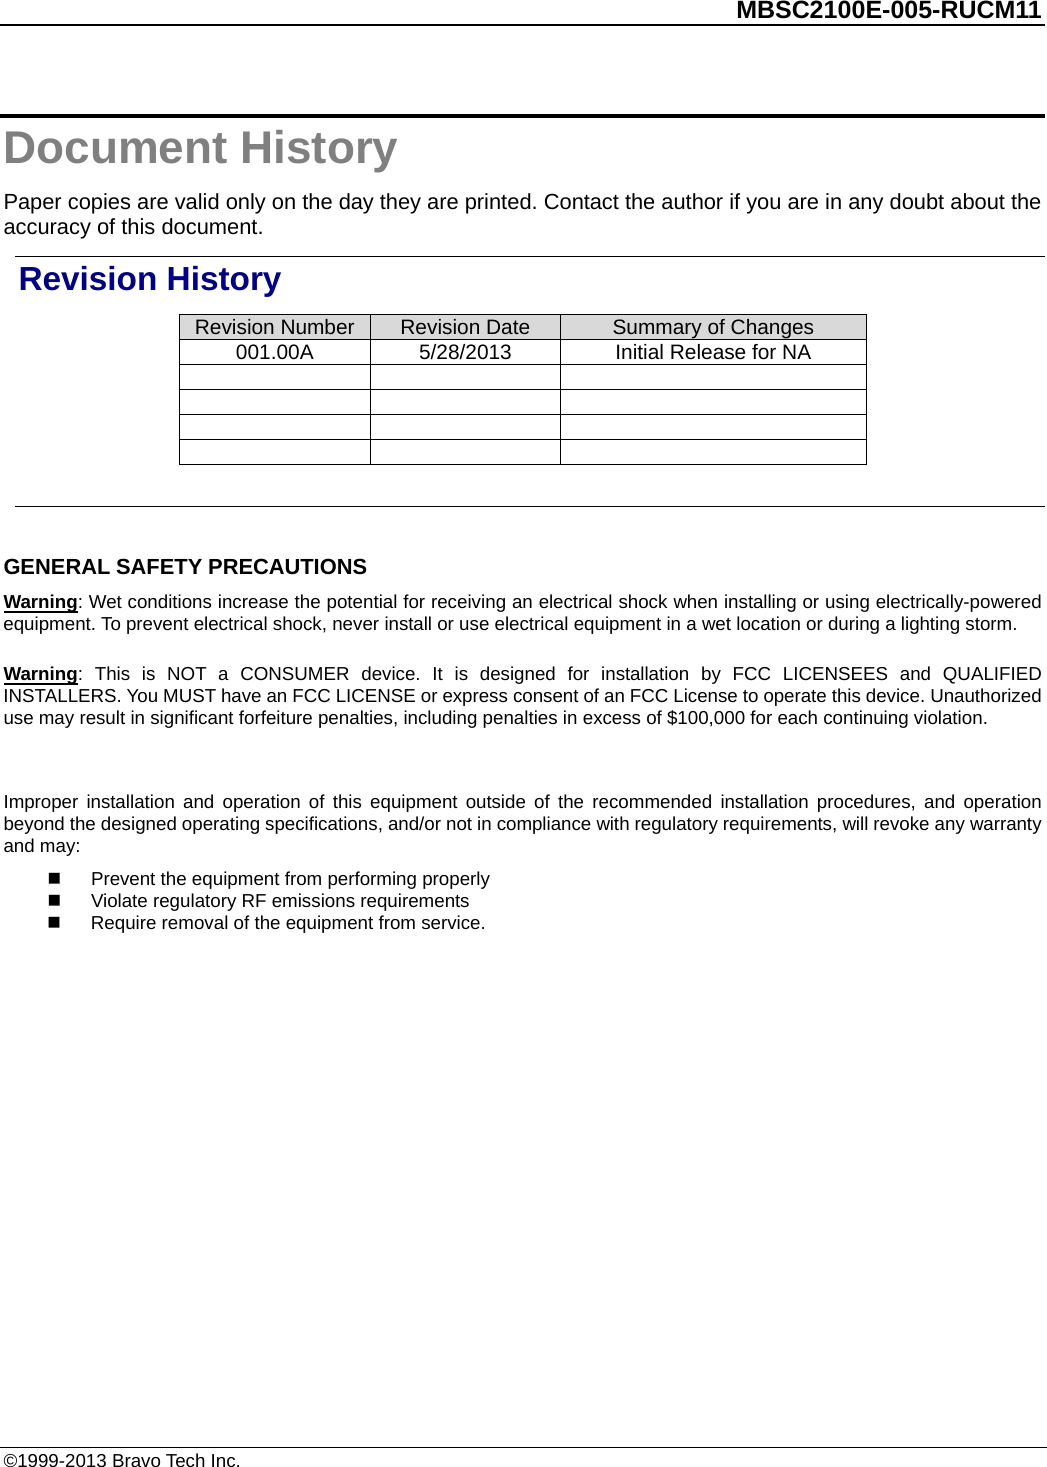          MBSC2100E-005-RUCM11   Document History Paper copies are valid only on the day they are printed. Contact the author if you are in any doubt about the accuracy of this document. Revision History Revision Number Revision Date Summary of Changes 001.00A 5/28/2013 Initial Release for NA                 GENERAL SAFETY PRECAUTIONS Warning: Wet conditions increase the potential for receiving an electrical shock when installing or using electrically-powered equipment. To prevent electrical shock, never install or use electrical equipment in a wet location or during a lighting storm. Warning:  This is NOT a CONSUMER device. It is designed for installation by FCC LICENSEES and QUALIFIED INSTALLERS. You MUST have an FCC LICENSE or express consent of an FCC License to operate this device. Unauthorized use may result in significant forfeiture penalties, including penalties in excess of $100,000 for each continuing violation.  Improper installation and operation of this equipment outside of the recommended installation procedures, and operation beyond the designed operating specifications, and/or not in compliance with regulatory requirements, will revoke any warranty and may:  Prevent the equipment from performing properly  Violate regulatory RF emissions requirements   Require removal of the equipment from service.  ©1999-2013 Bravo Tech Inc. 